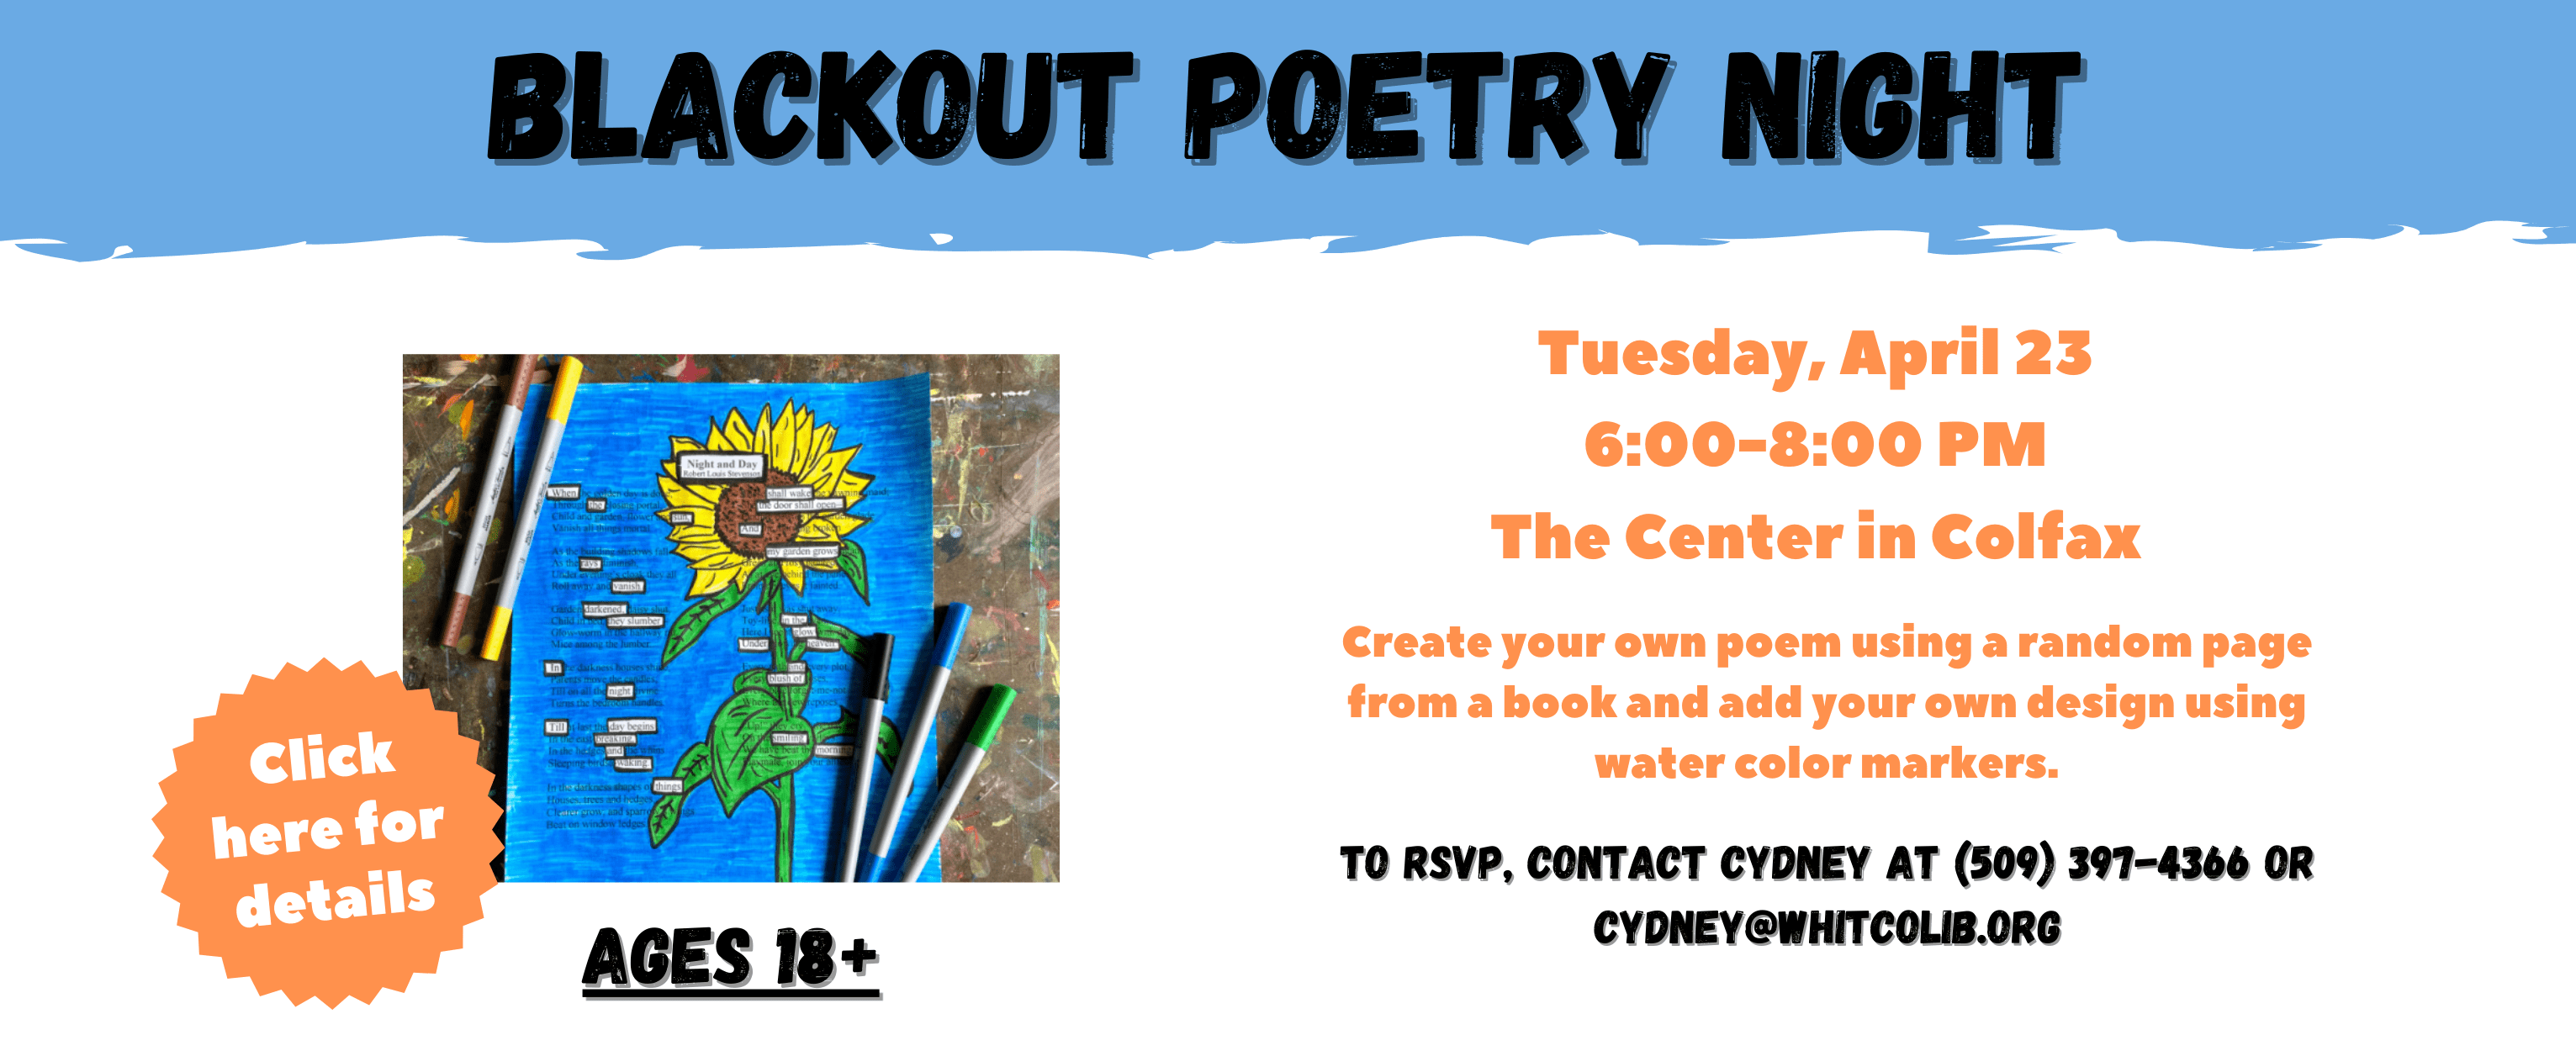 Don't miss out on Blackout Poetry Night at the Center in Colfax on April 23. Click here for details.